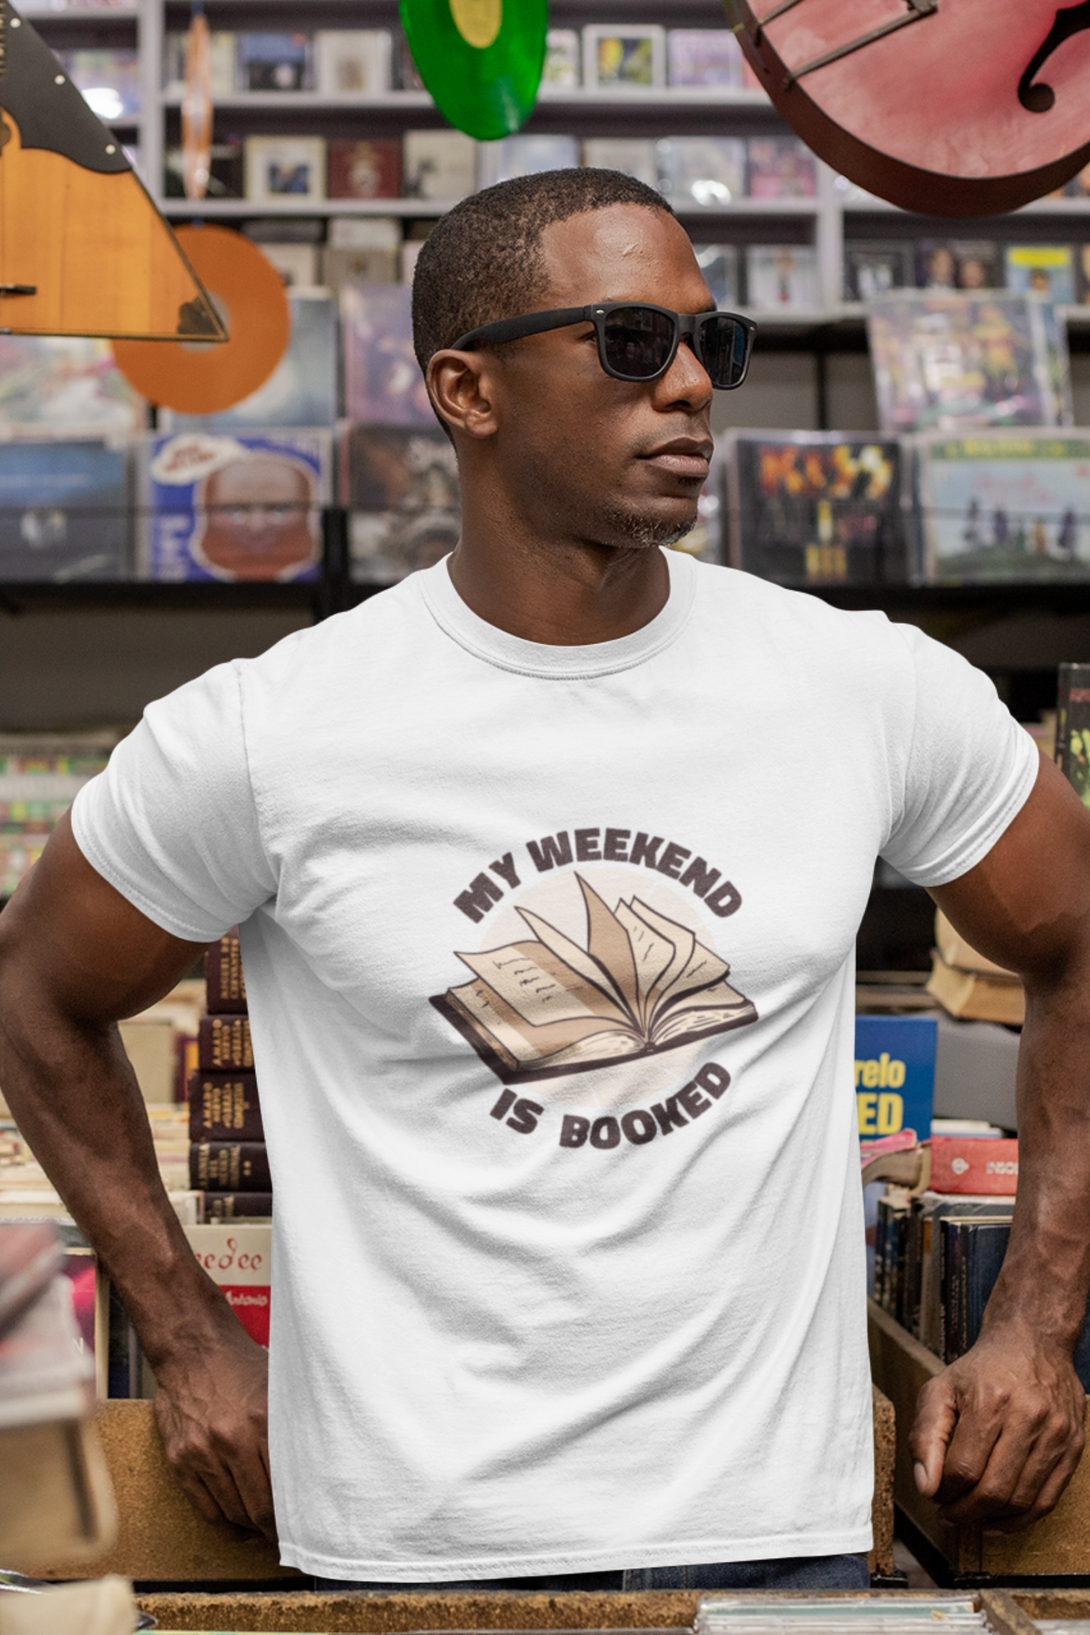 My Weekend Is Booked Printed T-Shirt For Men - WowWaves - 7